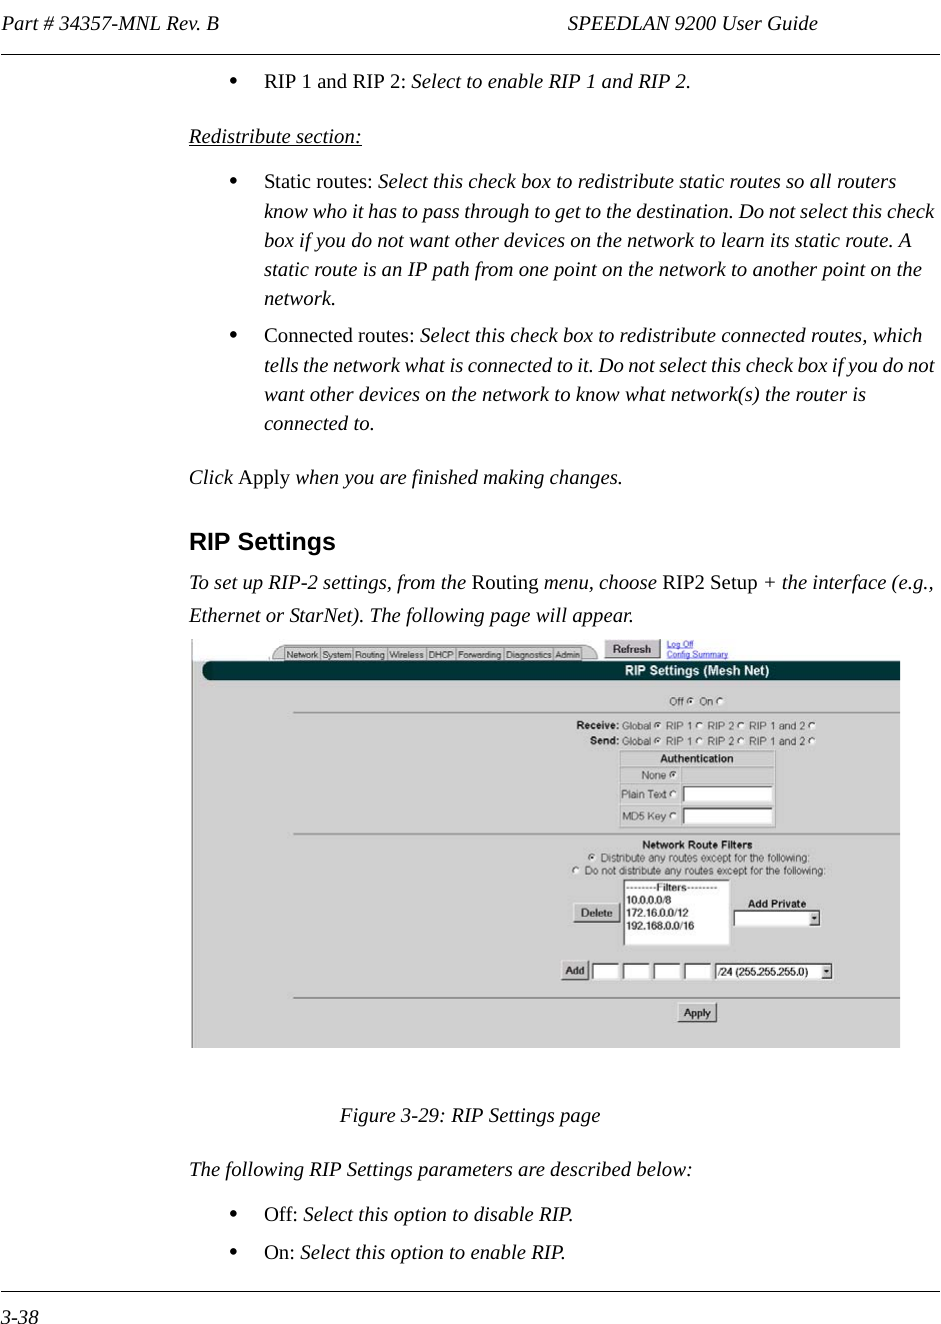 Part # 34357-MNL Rev. B                                                                   SPEEDLAN 9200 User Guide 3-38•RIP 1 and RIP 2: Select to enable RIP 1 and RIP 2.Redistribute section:•Static routes: Select this check box to redistribute static routes so all routers know who it has to pass through to get to the destination. Do not select this check box if you do not want other devices on the network to learn its static route. A static route is an IP path from one point on the network to another point on the network. •Connected routes: Select this check box to redistribute connected routes, which tells the network what is connected to it. Do not select this check box if you do not want other devices on the network to know what network(s) the router is connected to.Click Apply when you are finished making changes. RIP SettingsTo set up RIP-2 settings, from the Routing menu, choose RIP2 Setup + the interface (e.g., Ethernet or StarNet). The following page will appear.Figure 3-29: RIP Settings pageThe following RIP Settings parameters are described below:•Off: Select this option to disable RIP.•On: Select this option to enable RIP. 